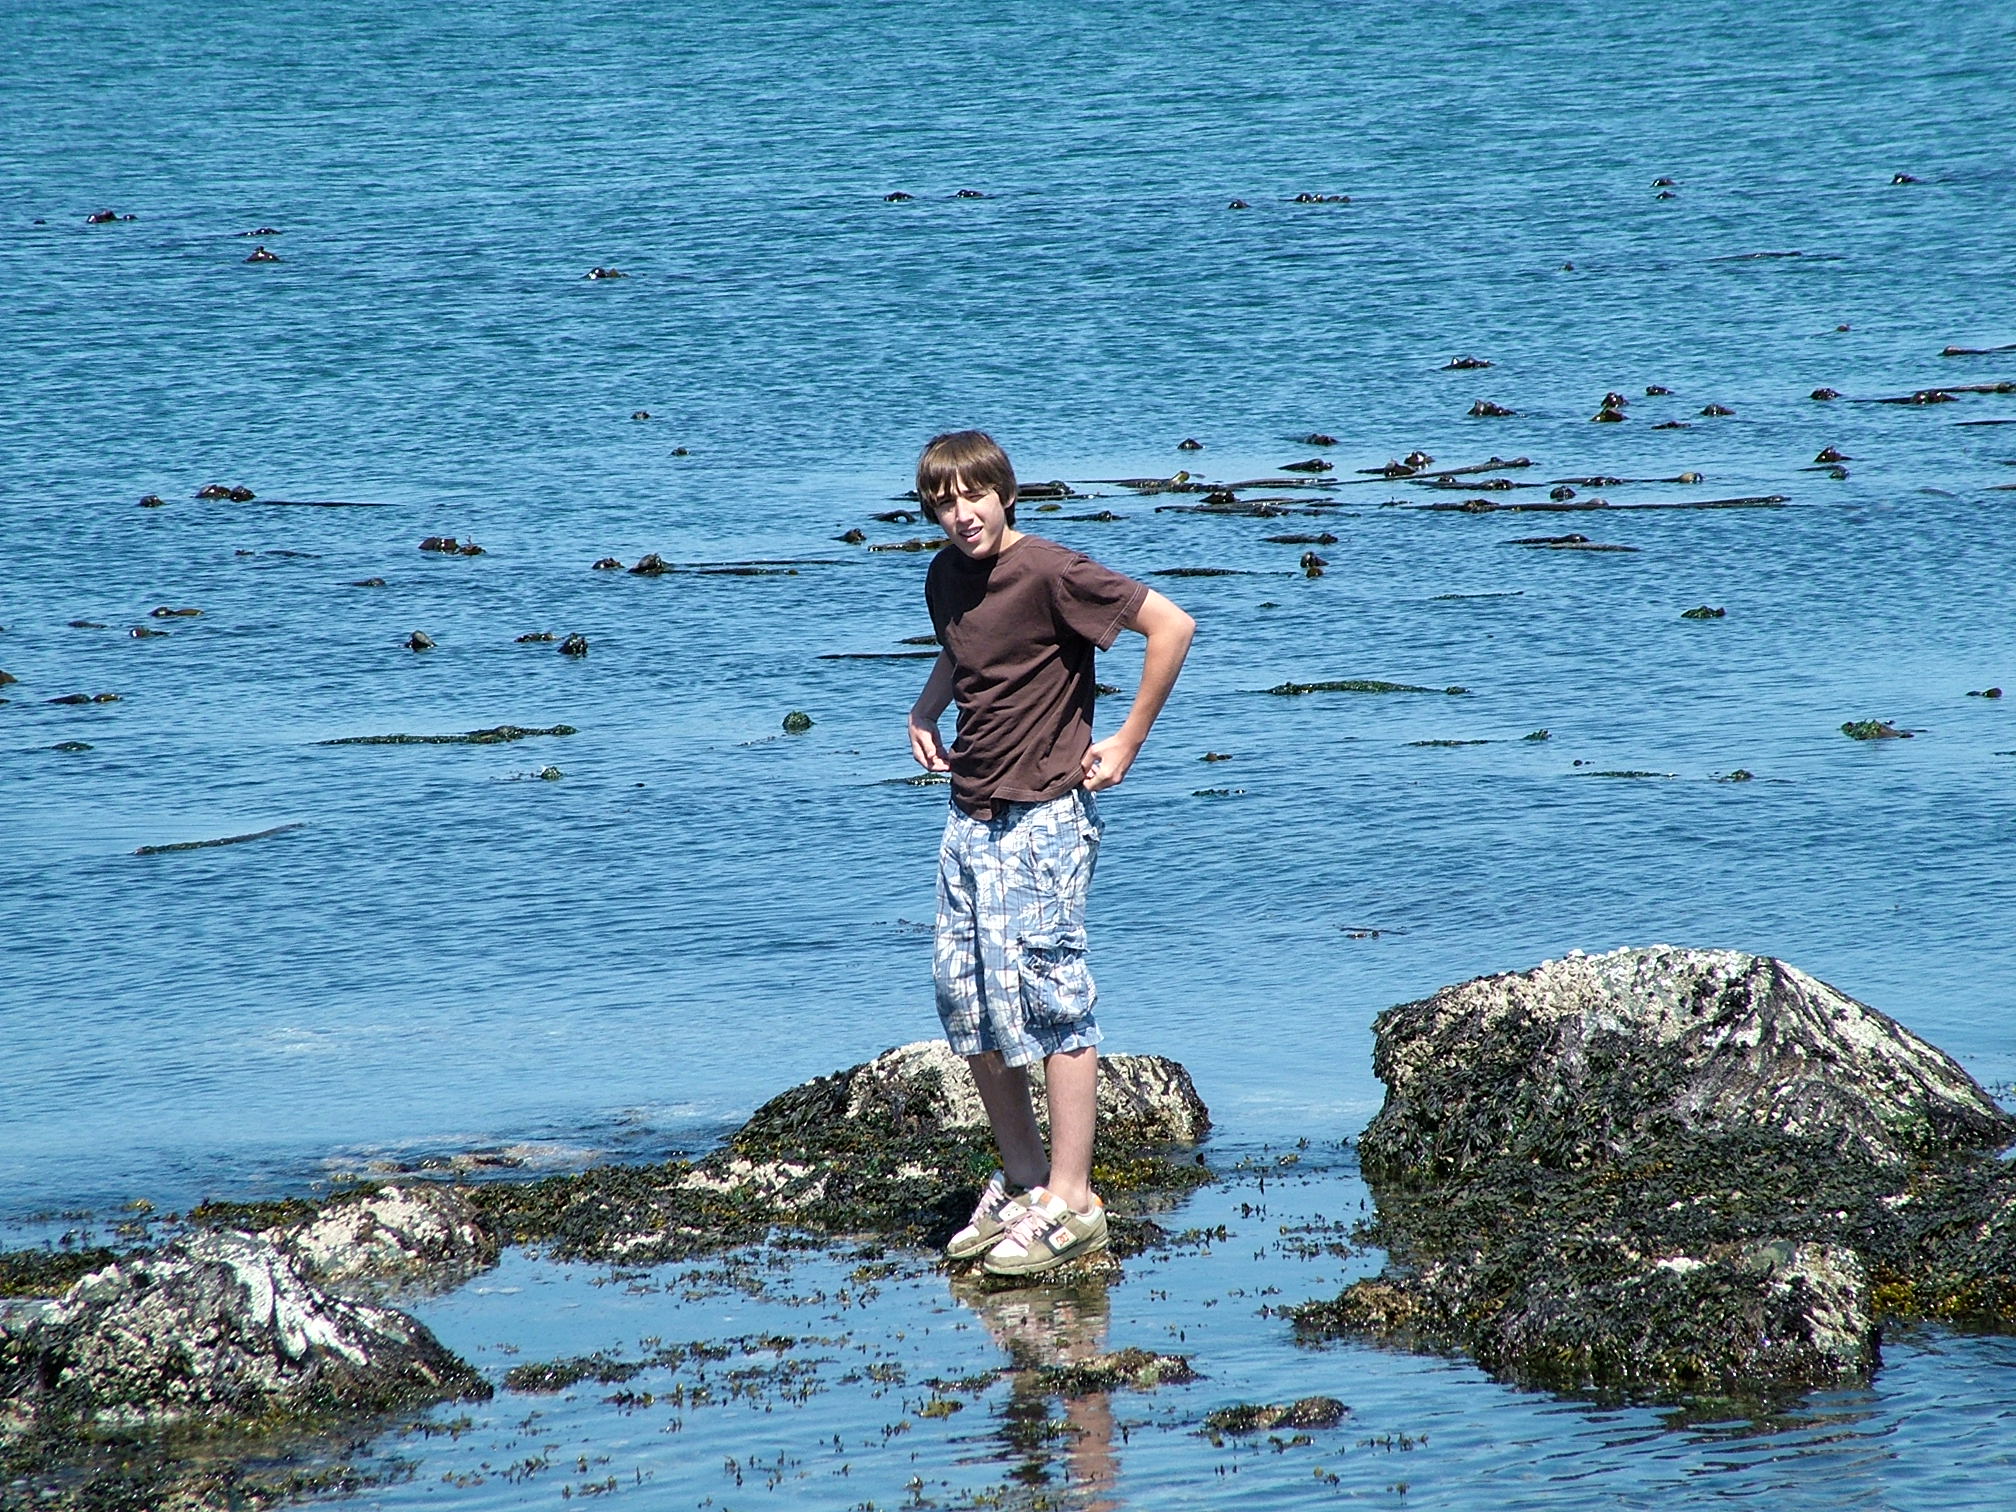 a boy is standing in shallow water near rocky shore